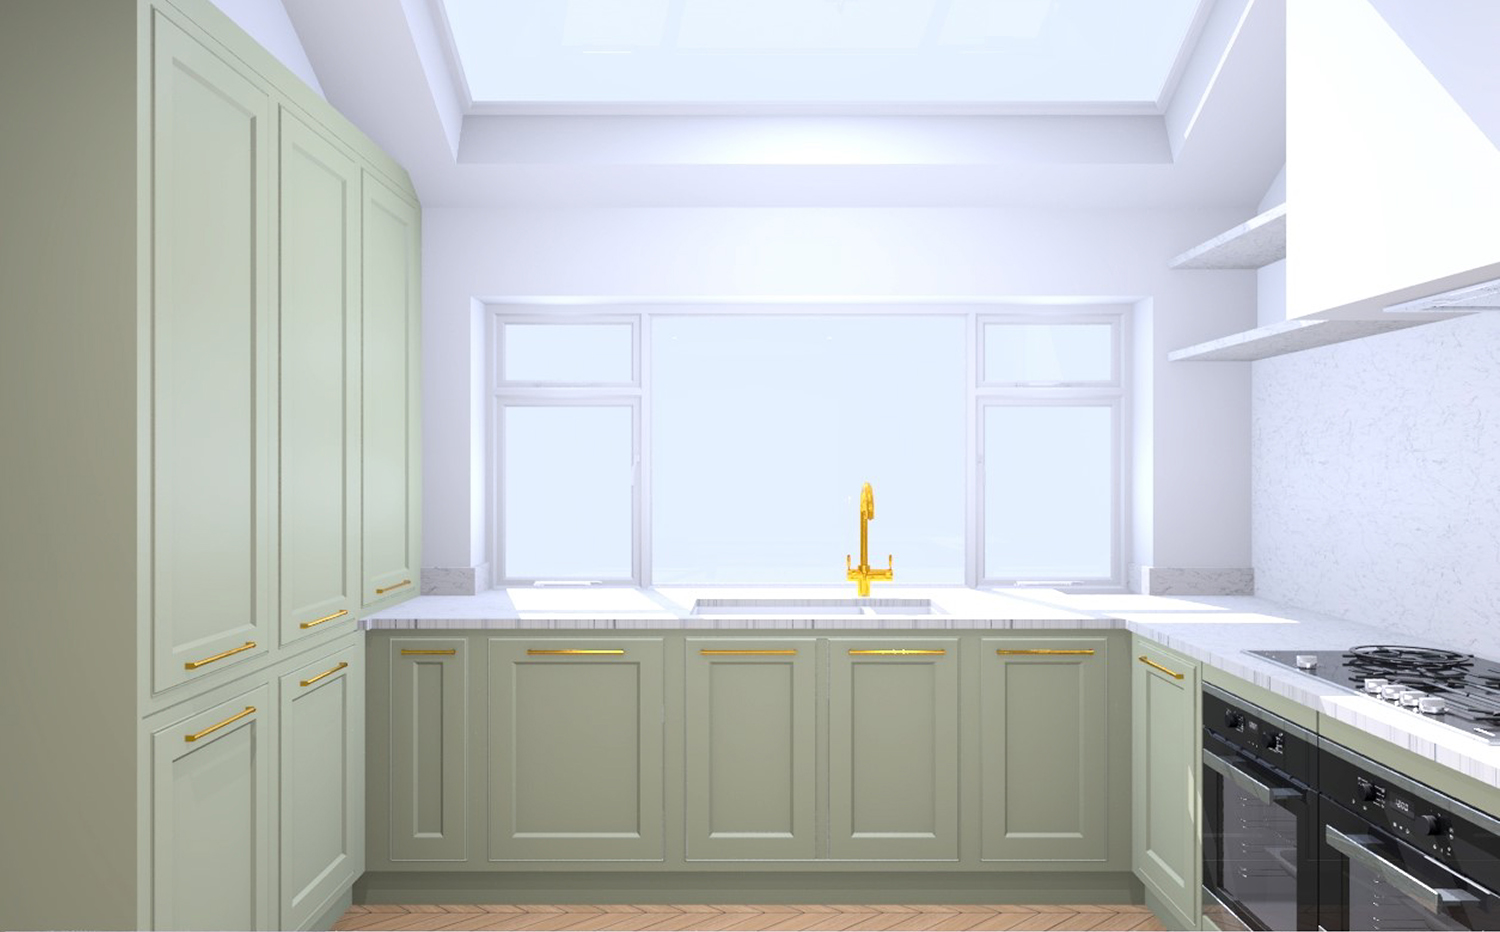 CAD drawing of kitchen design